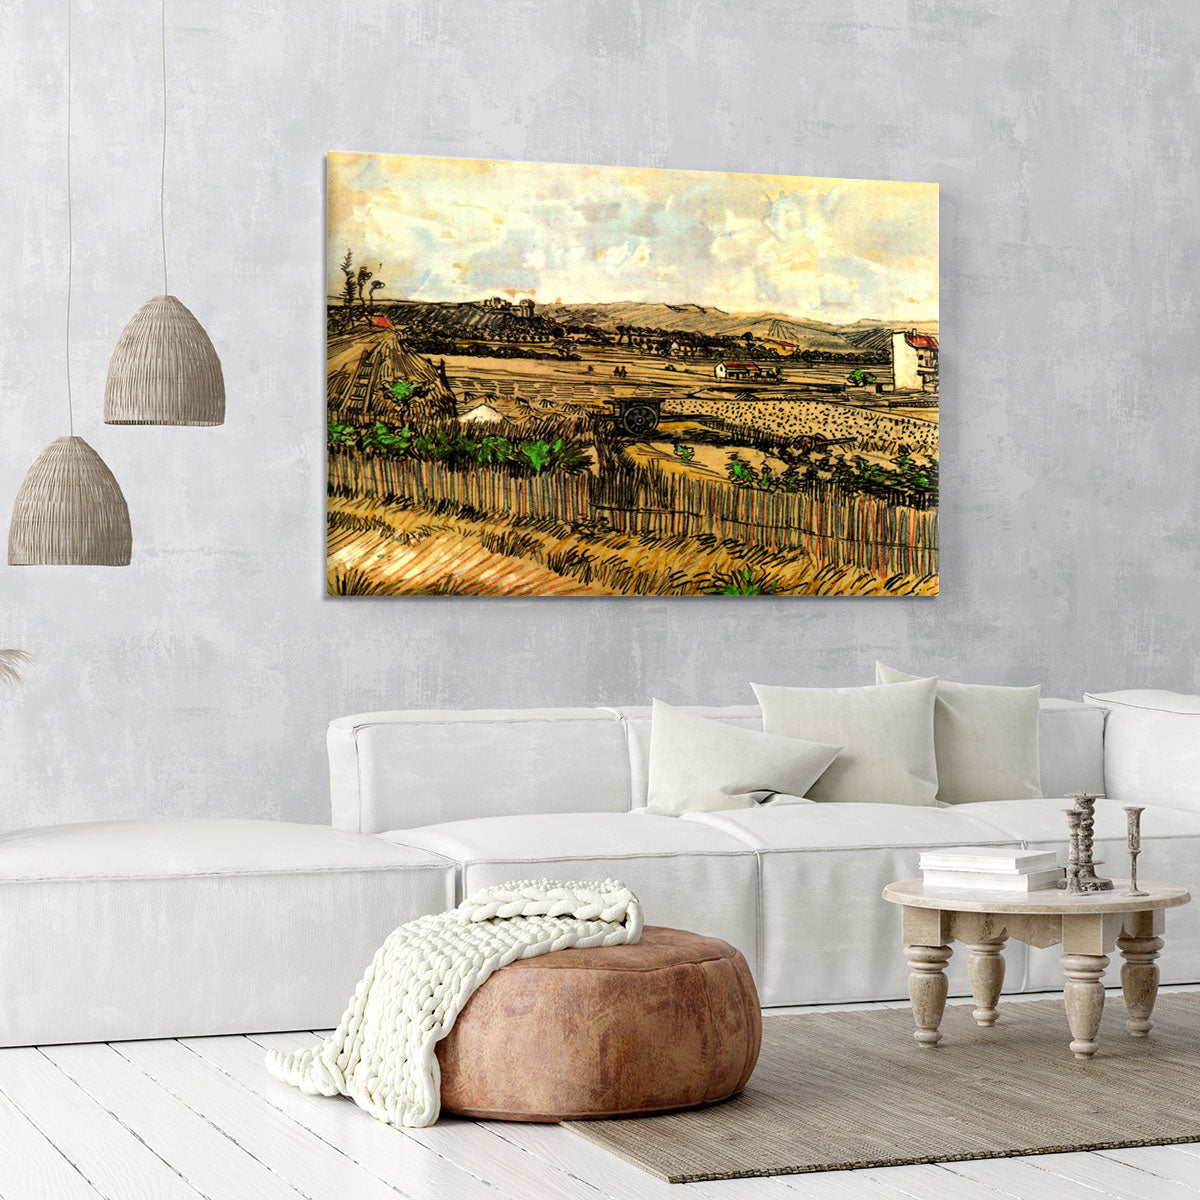 Harvest in Provence at the Left Montmajour by Van Gogh Canvas Print or Poster - Canvas Art Rocks - 6